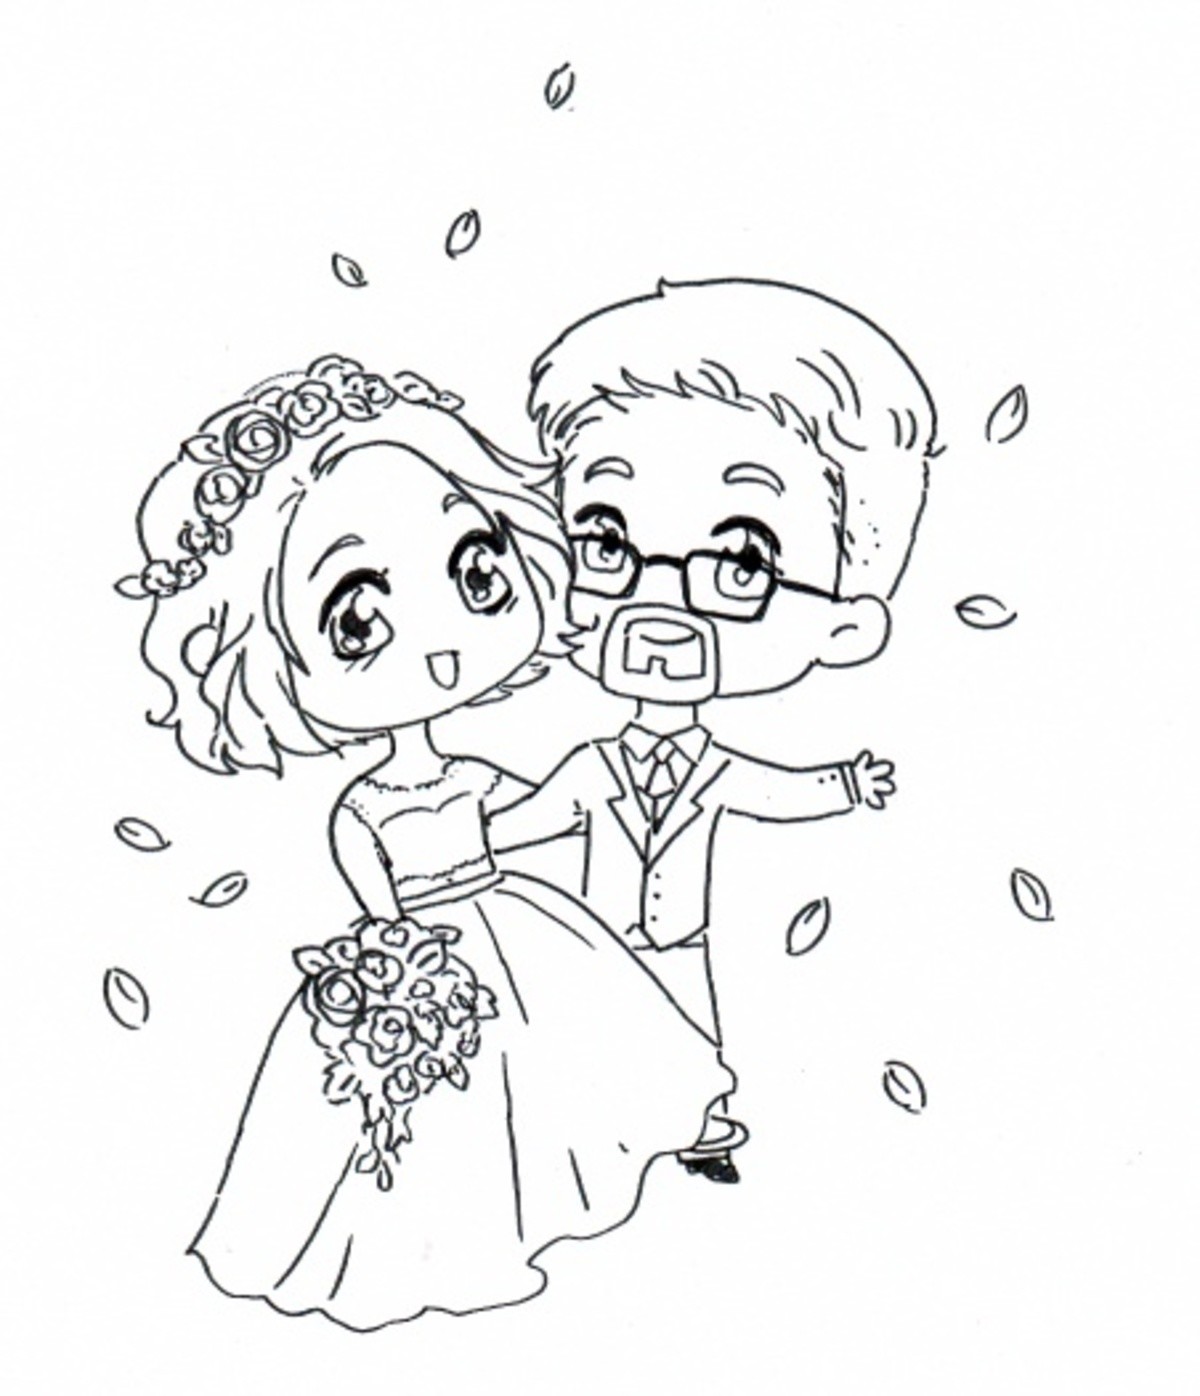 Update and a wedding. Hi FJ ^w^/ Everything is better know after some rough time. My Knee has healed, we got married, went to Japan and are now back. New comic 